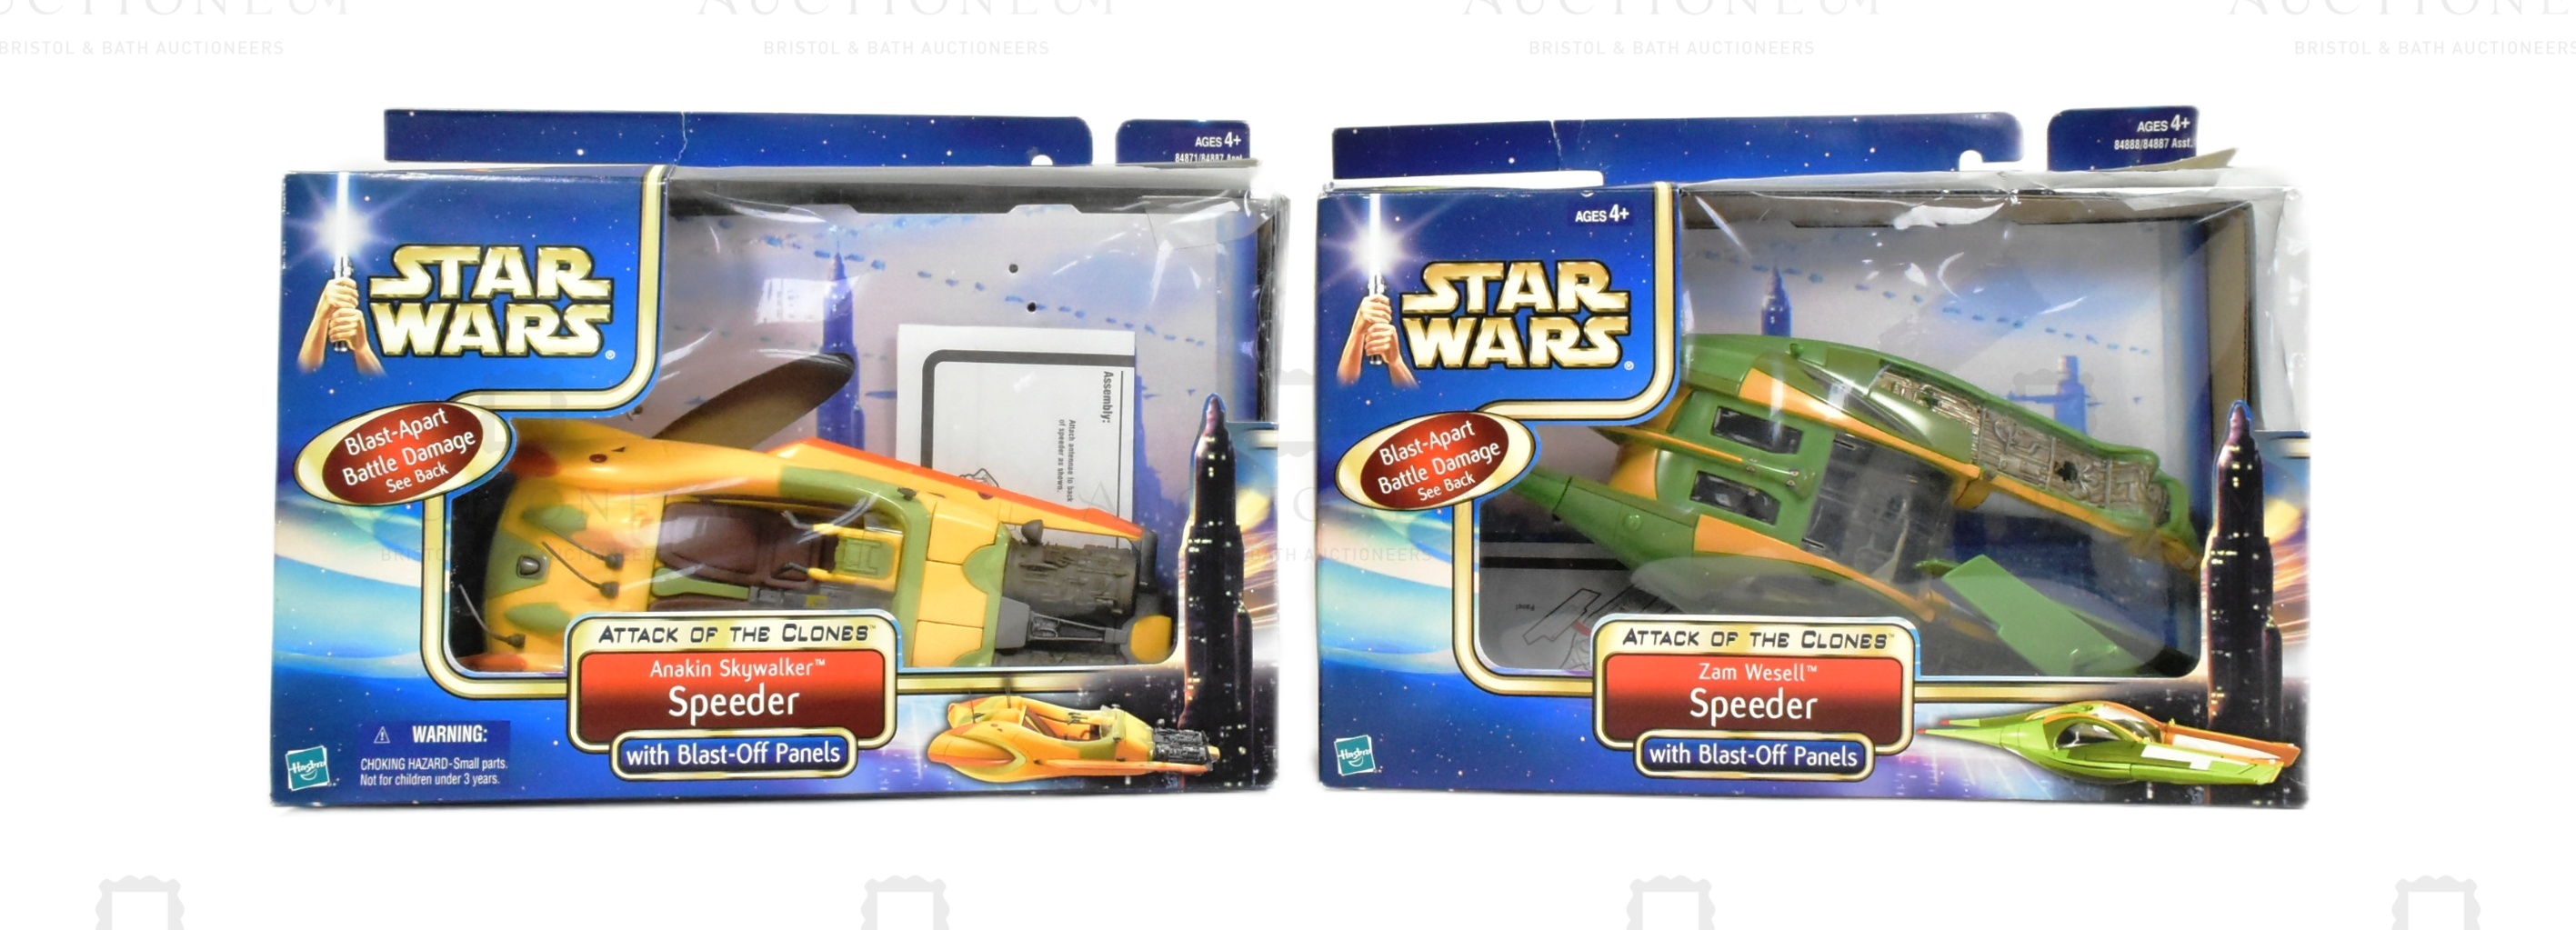 STAR WARS - ATTACK OF THE CLONES - BOXED PLAYSETS